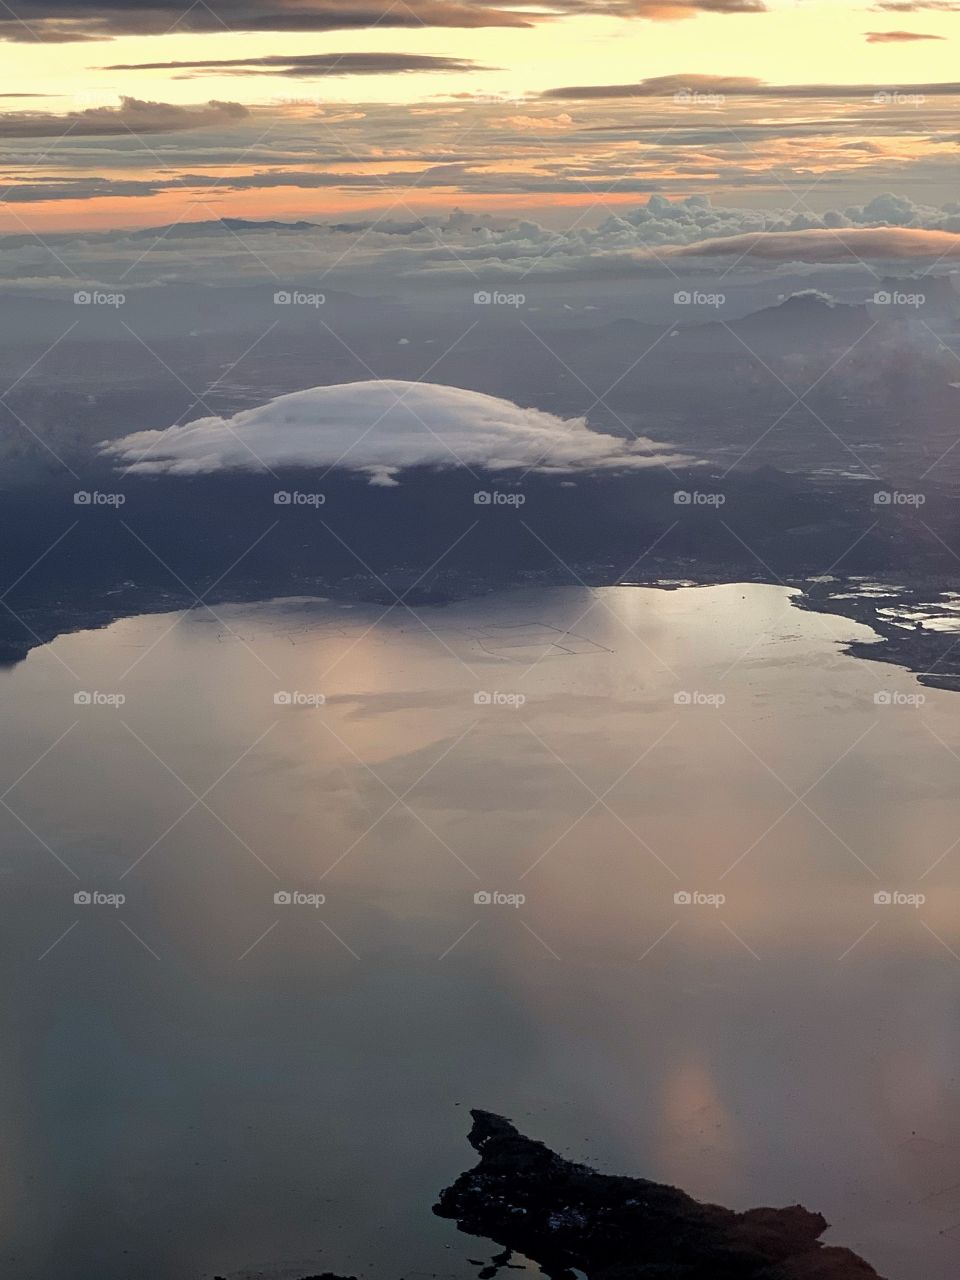 View of clouds and land mass from an airplane near sunset